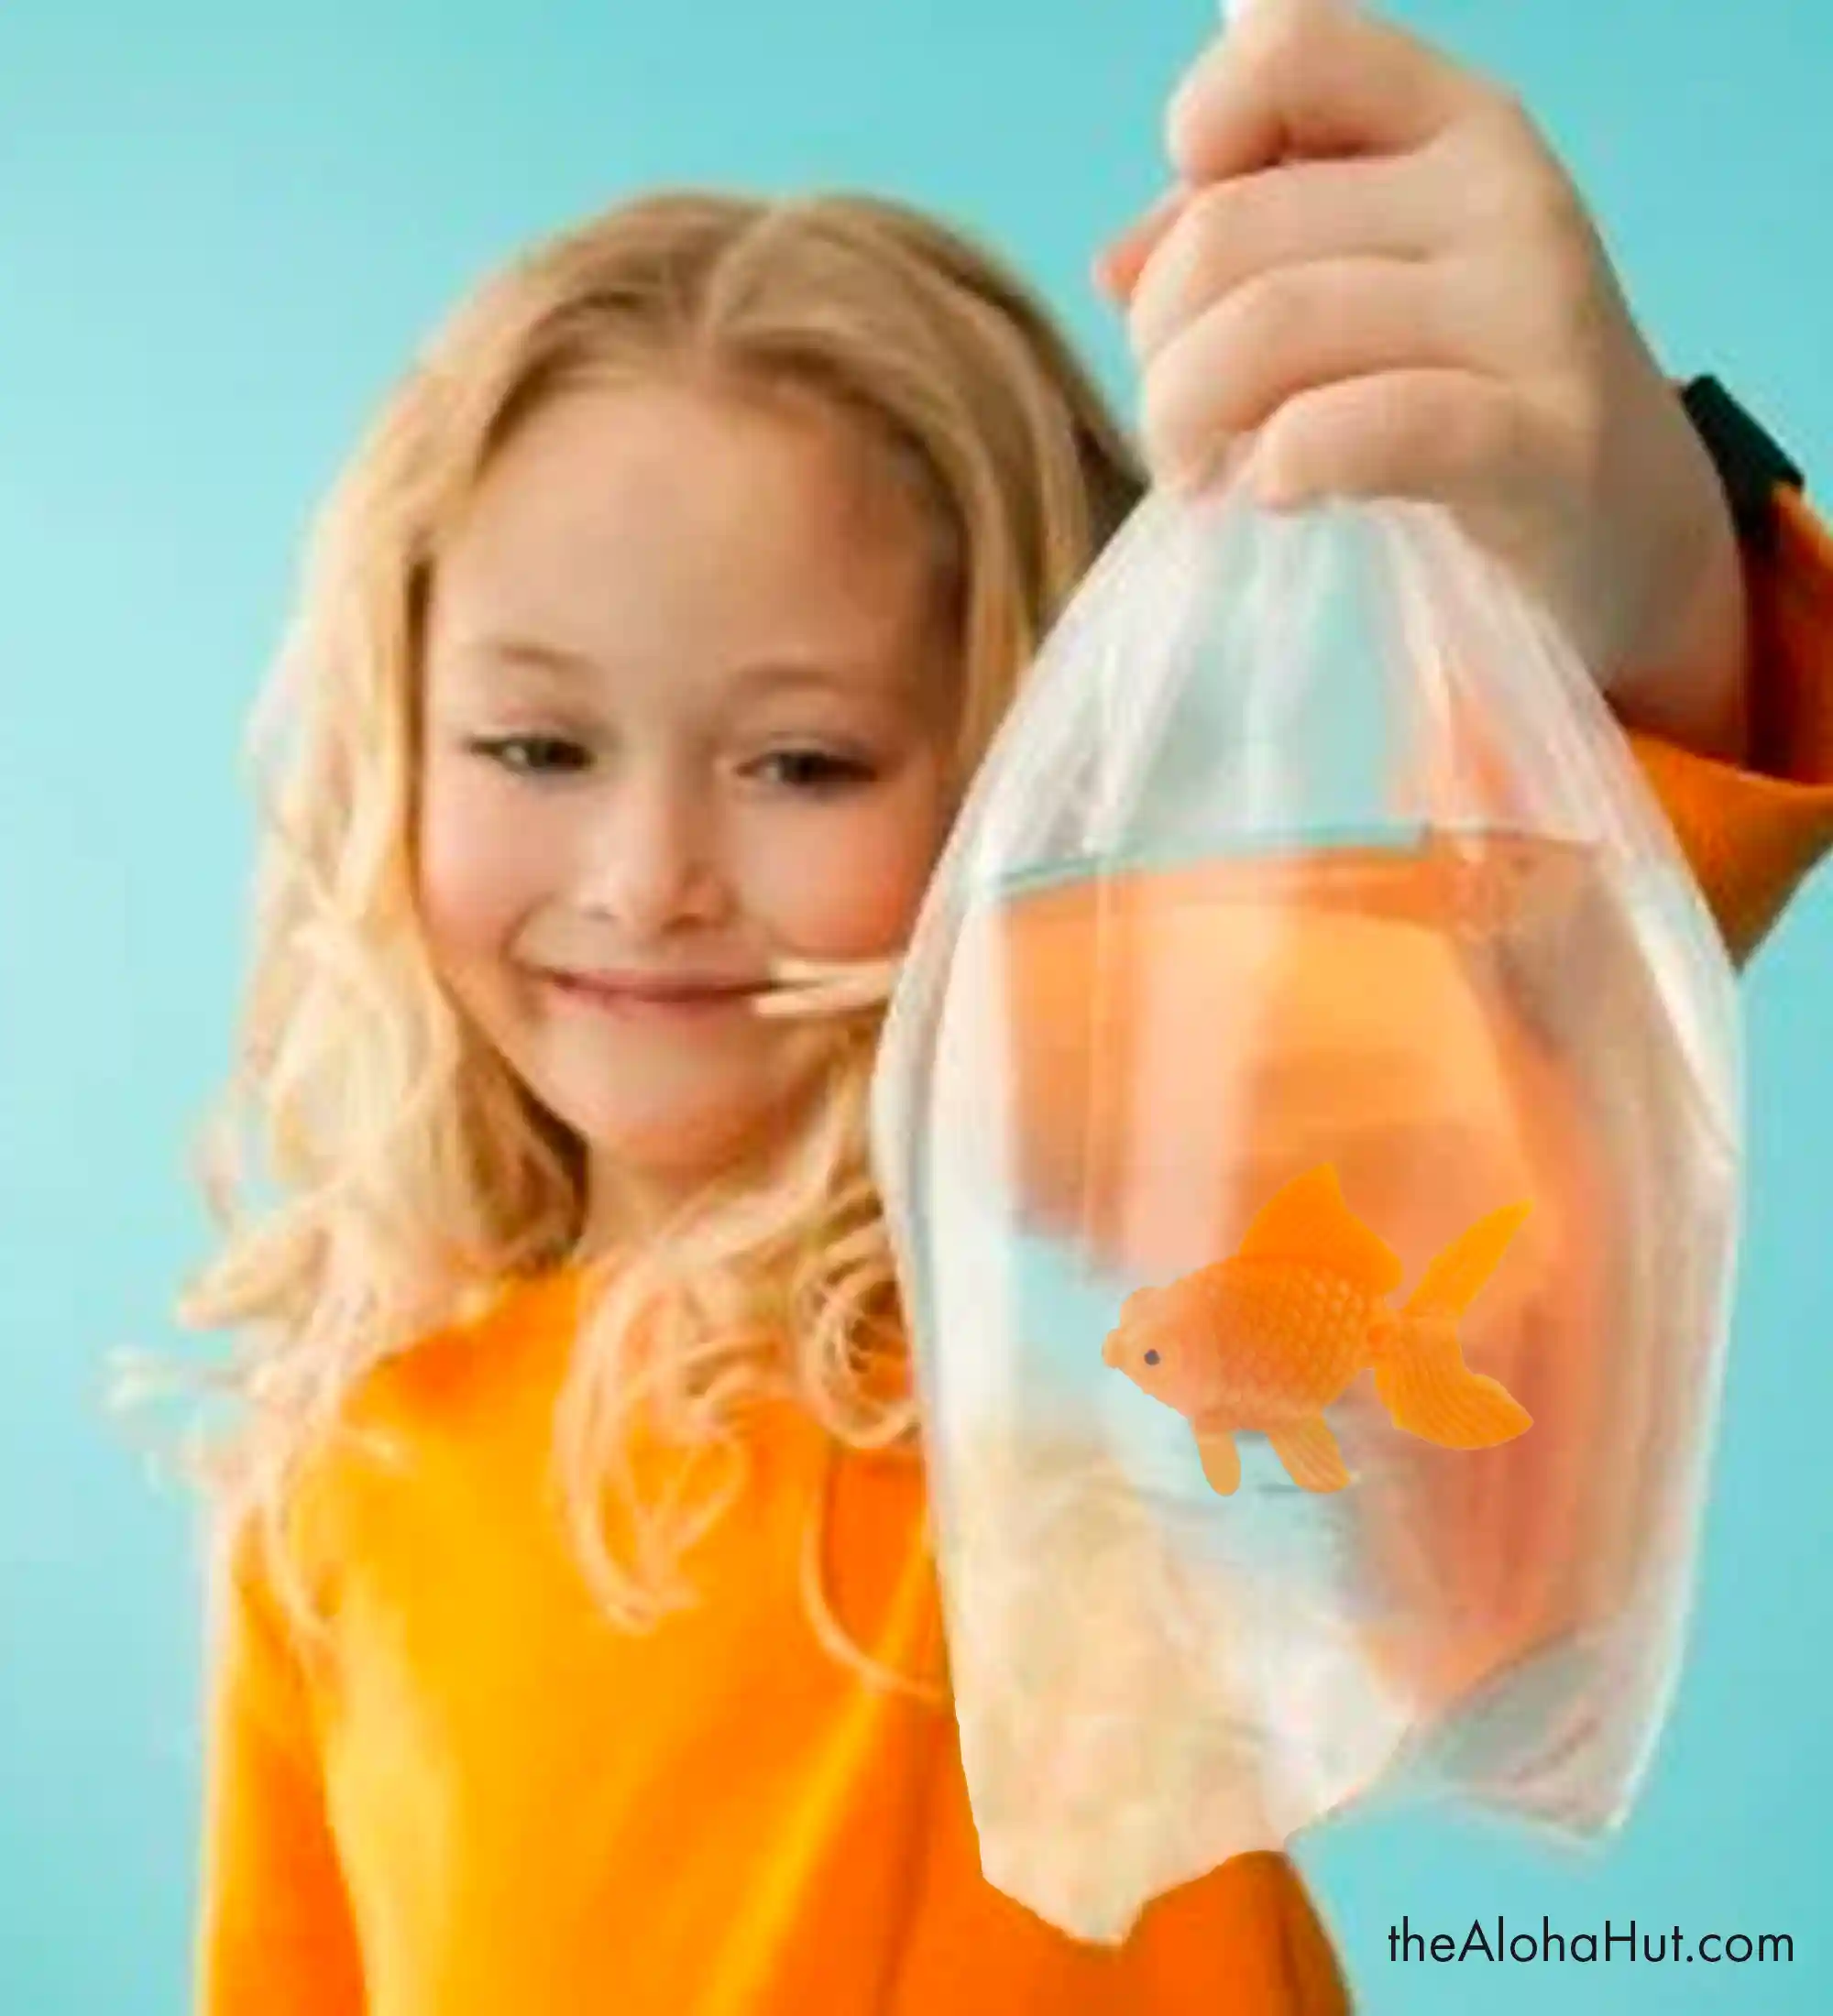 Carnival Party Ideas - Carnival party favor - fish in bag by the Aloha Hut